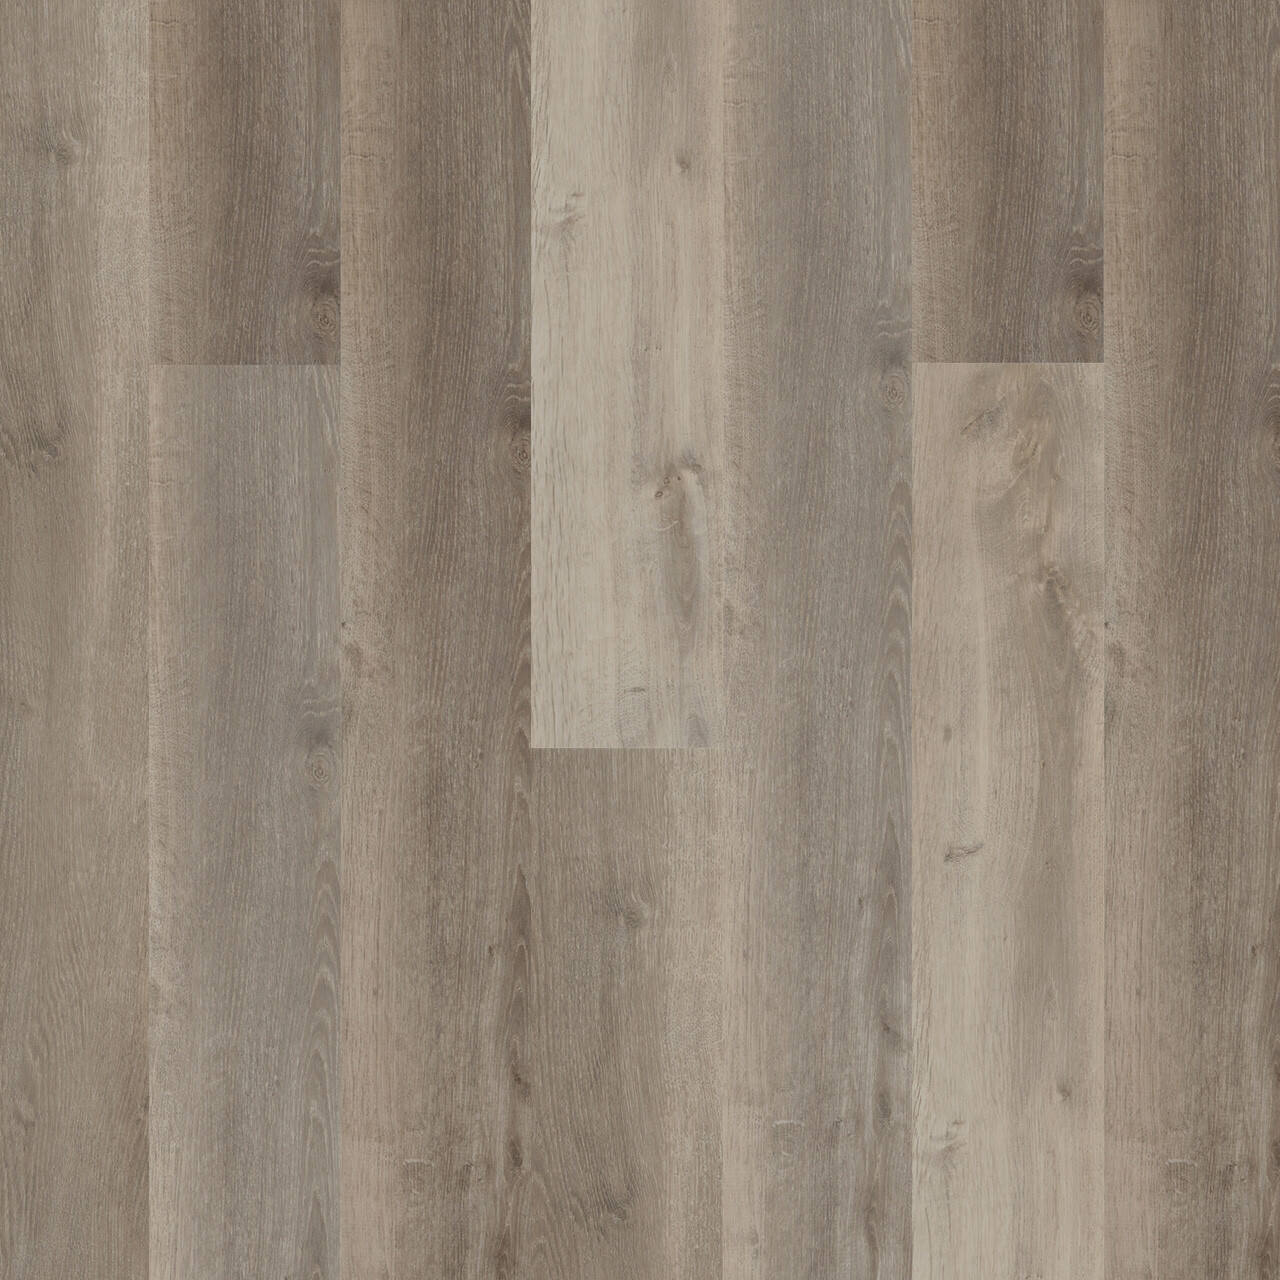 Engineered Floors - Triumph Collection - New Standard Plus - 7 in. x 48 in. - Santa Maria